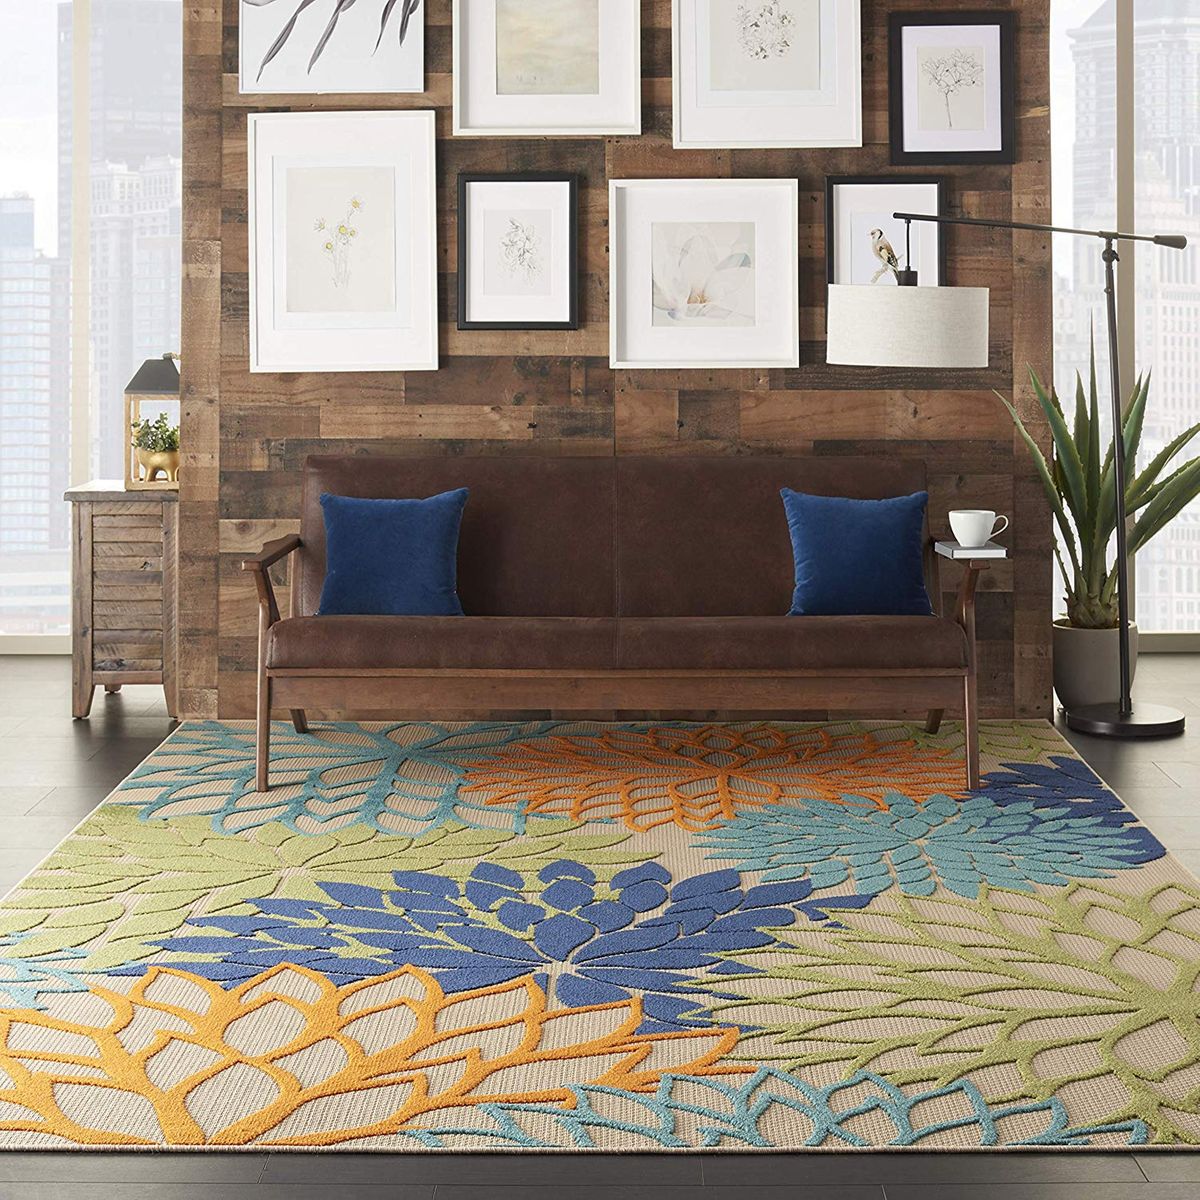 9 Best Indoor Outdoor Rugs 2019 The, What Are The Best Outdoor Rugs Made Of Vinyl